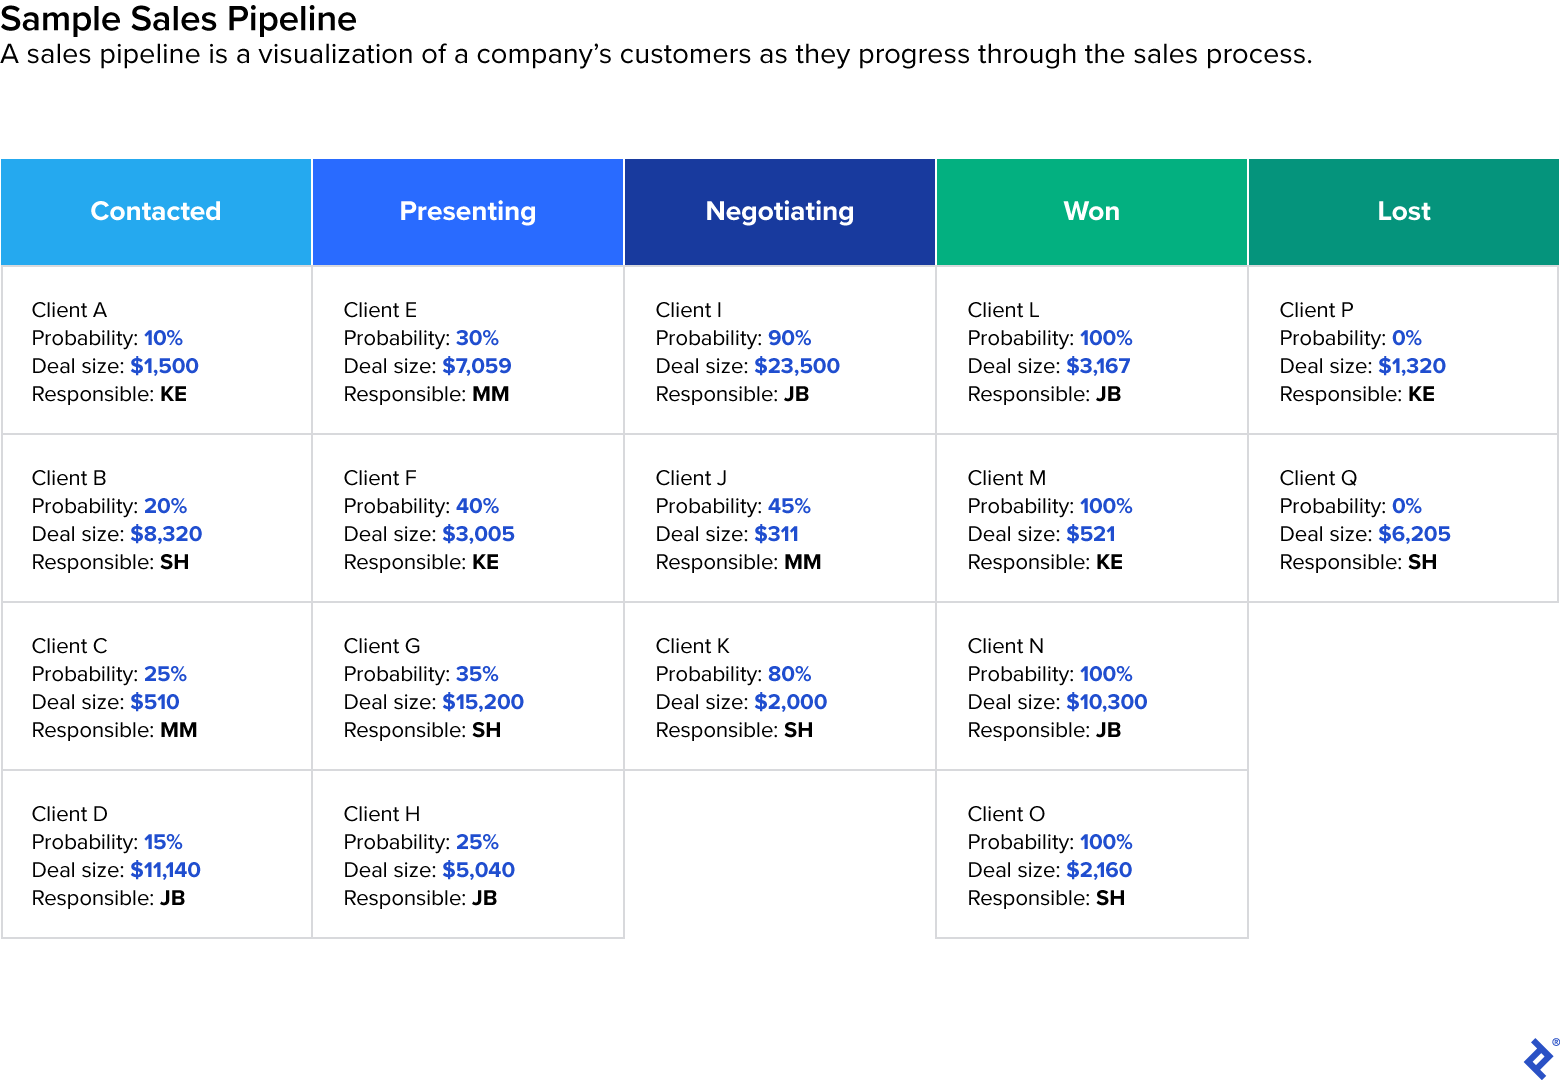 This sample sales pipeline chart displays five columns of hypothetical client statuses including contacted, presenting, negotiating, won, and lost.